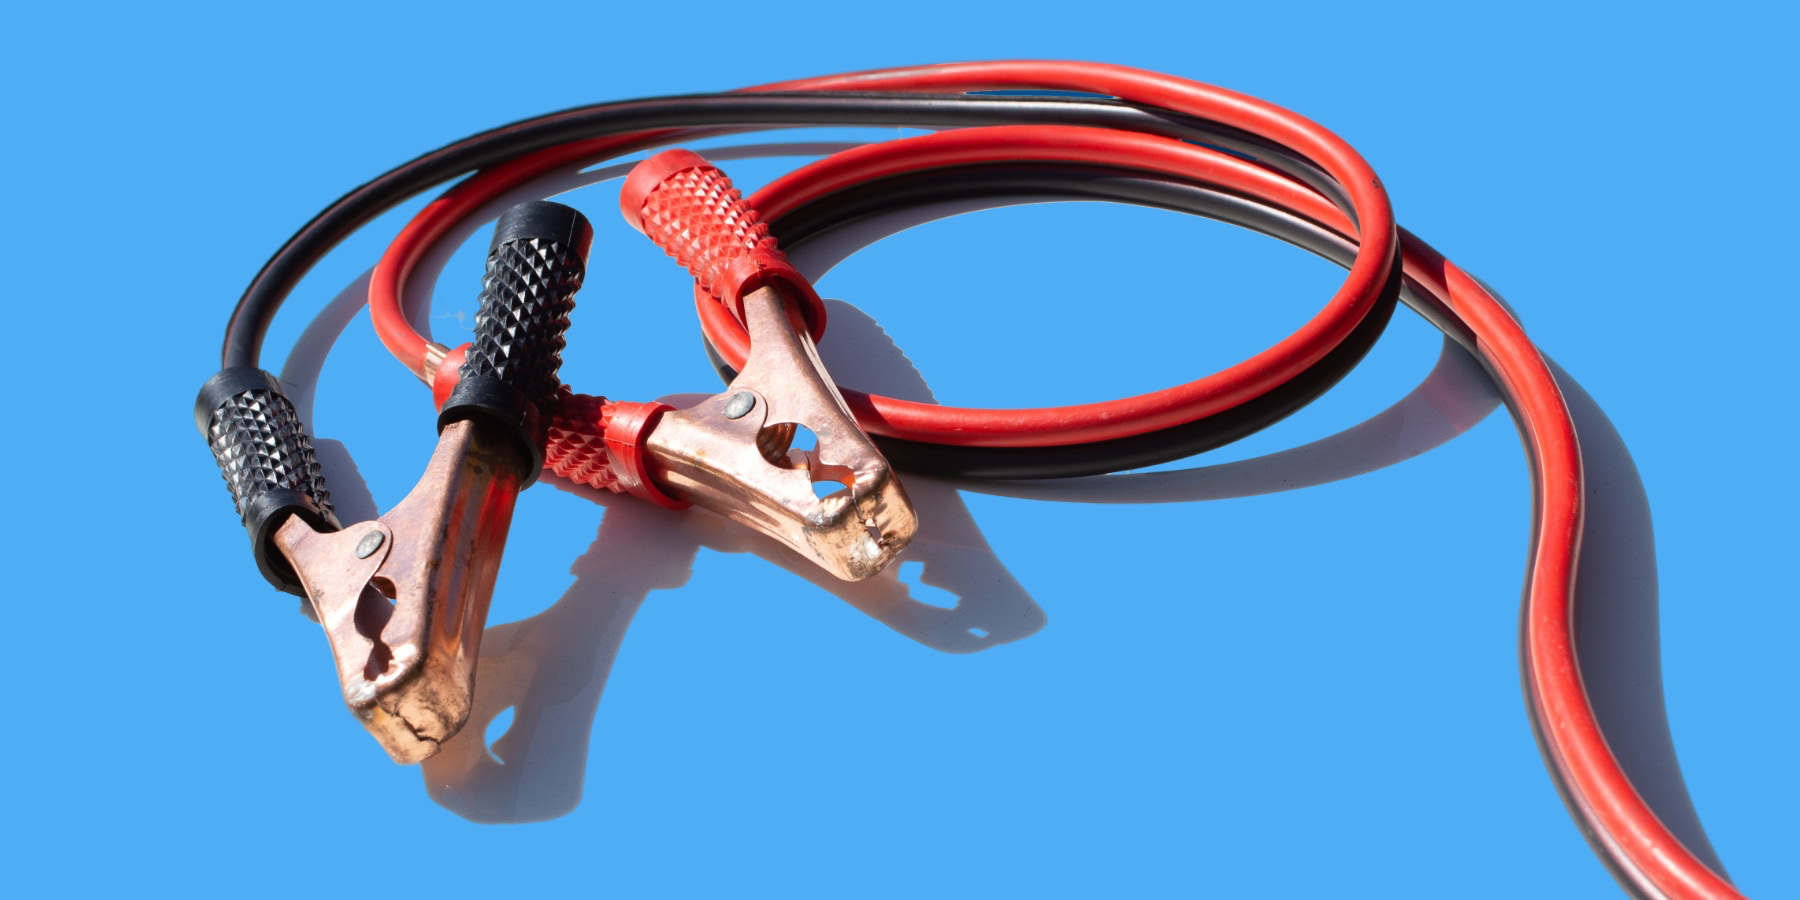 Jumper cables, big electrical clips that you would clip to a car battery to 'jump start' it. Red and bacl cables, on a blue background.